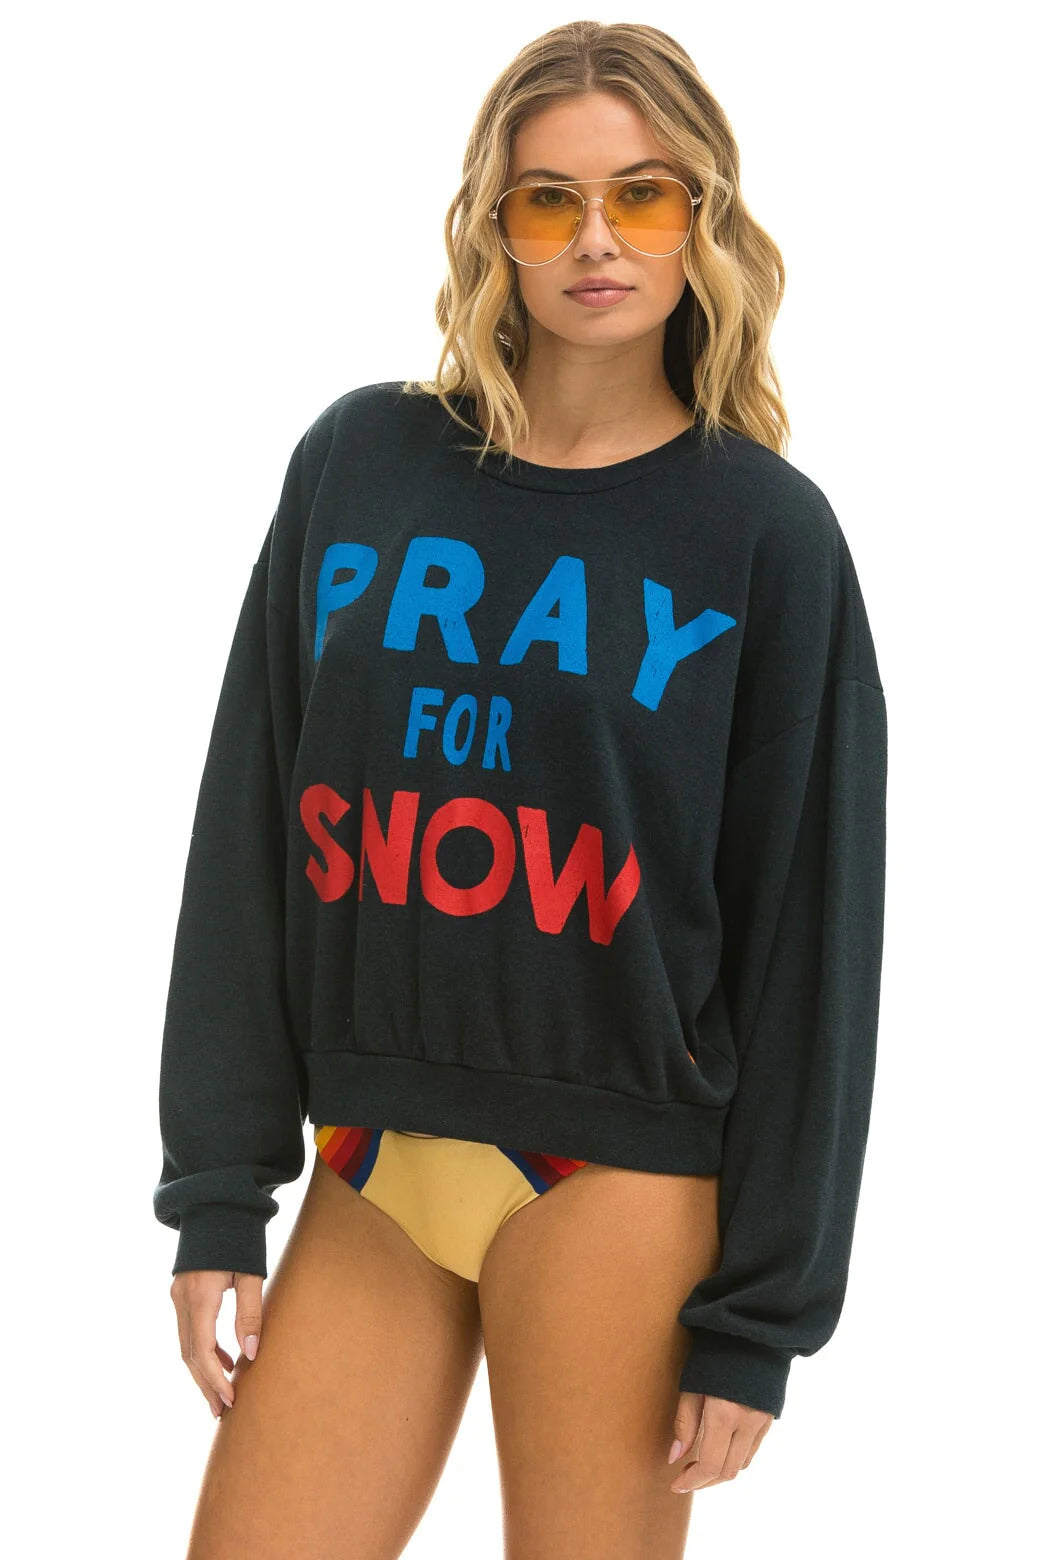 Aviator Nation PRAY FOR SNOW RELAXED CREW SWEATSHIRT - CHARCOAL